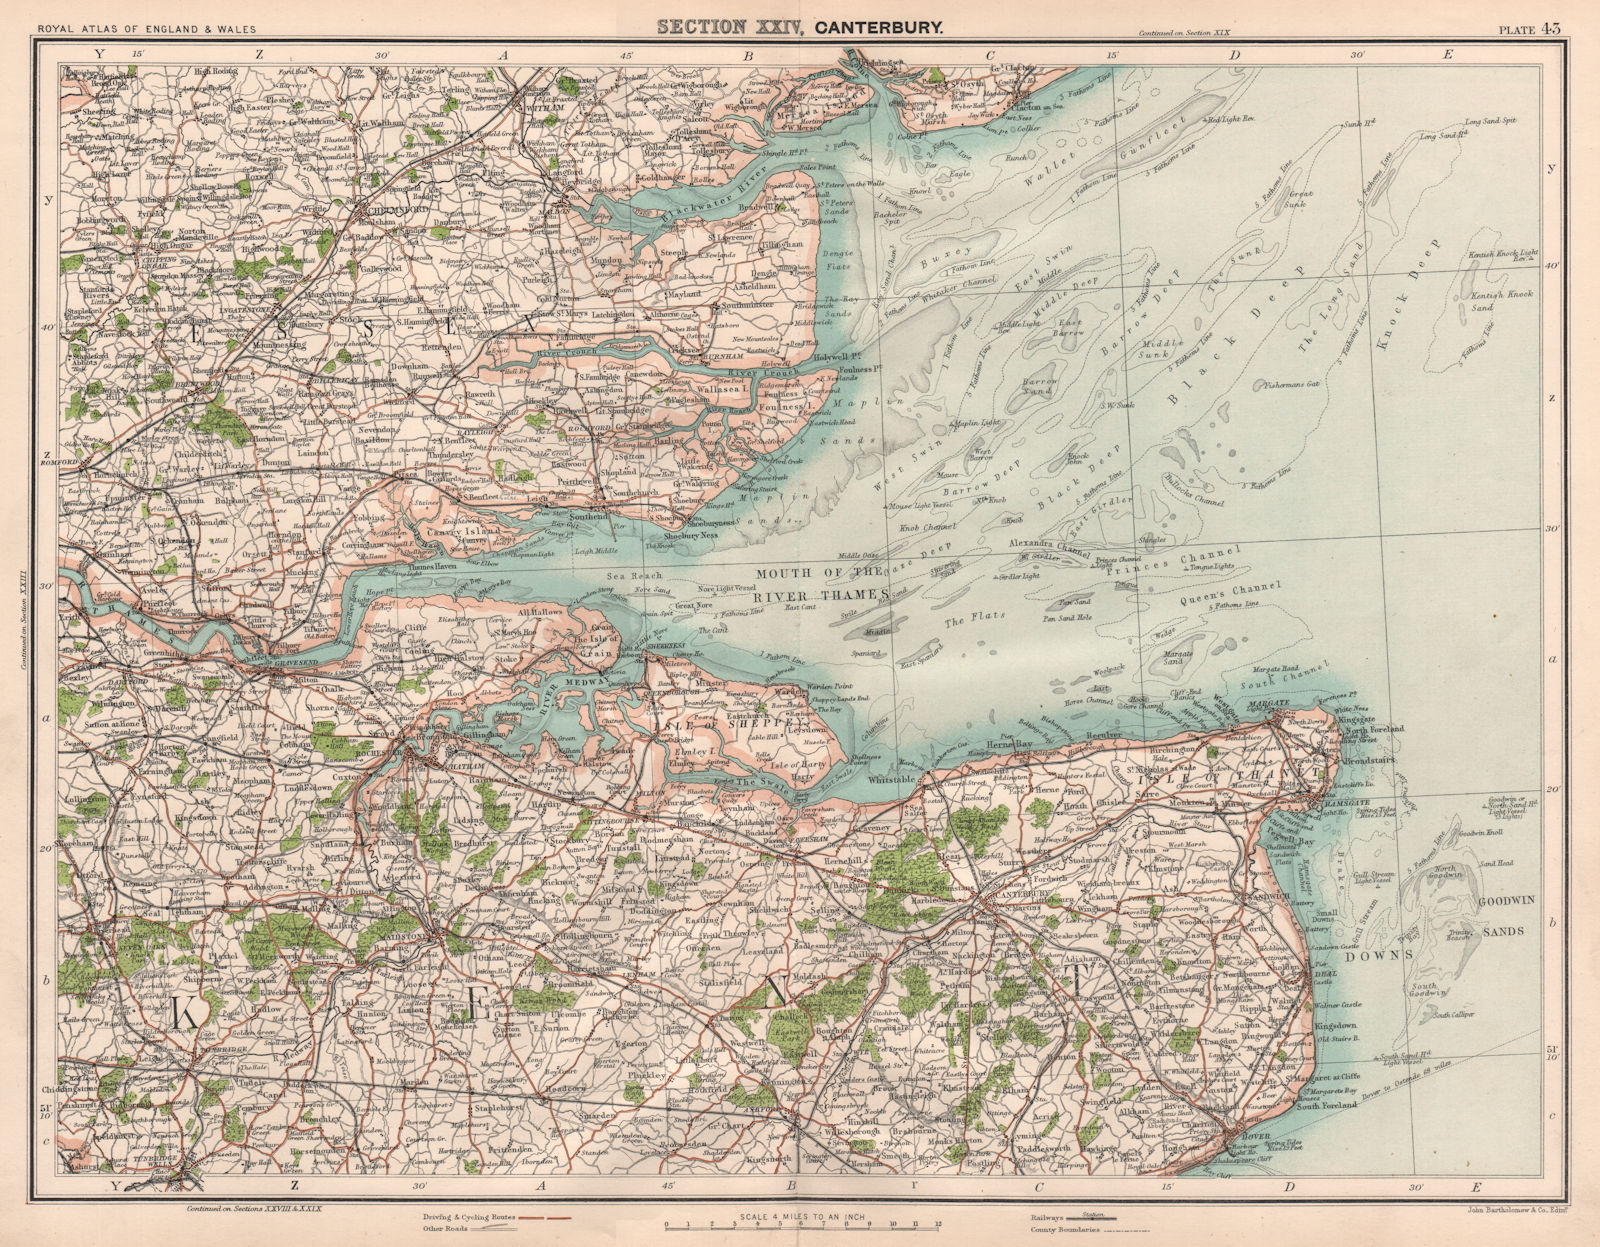 Associate Product THAMES ESTUARY. Channels sands Medway Kent Essex Thanet Canterbury 1898 map